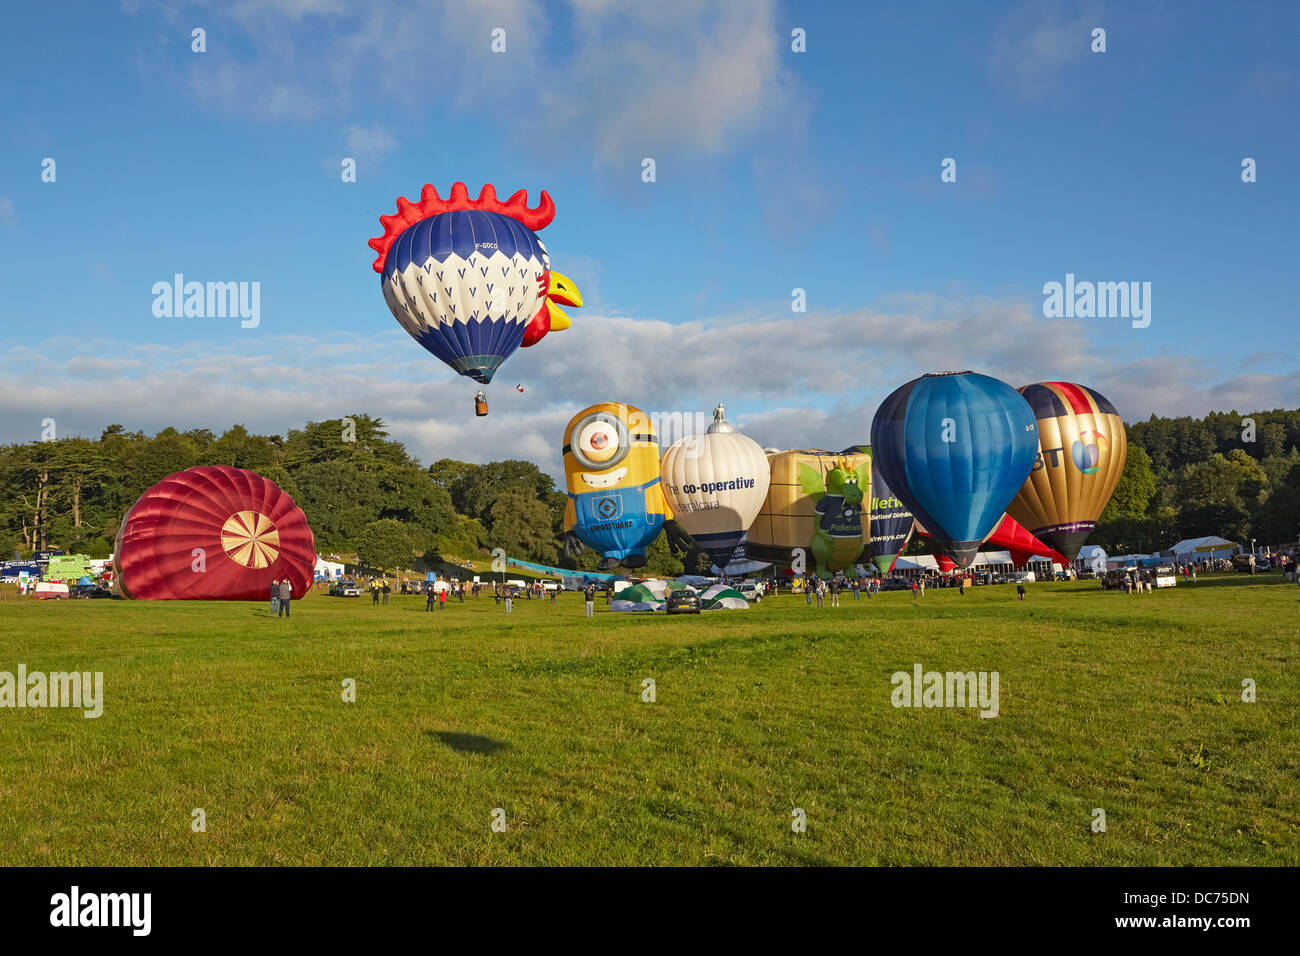 Bristol, UK. 9th Aug, 2013. Balloons at the 35th UK Bristol balloon fiesta at the Ashton court estate Morning launch launch on the 9th August 2013 including the BT FT Ricoh Palletways an Despicable Me Stuart minion balloons with the French Cockerel balloon taking off Credit:  David Lyon/Alamy Live News Stock Photo